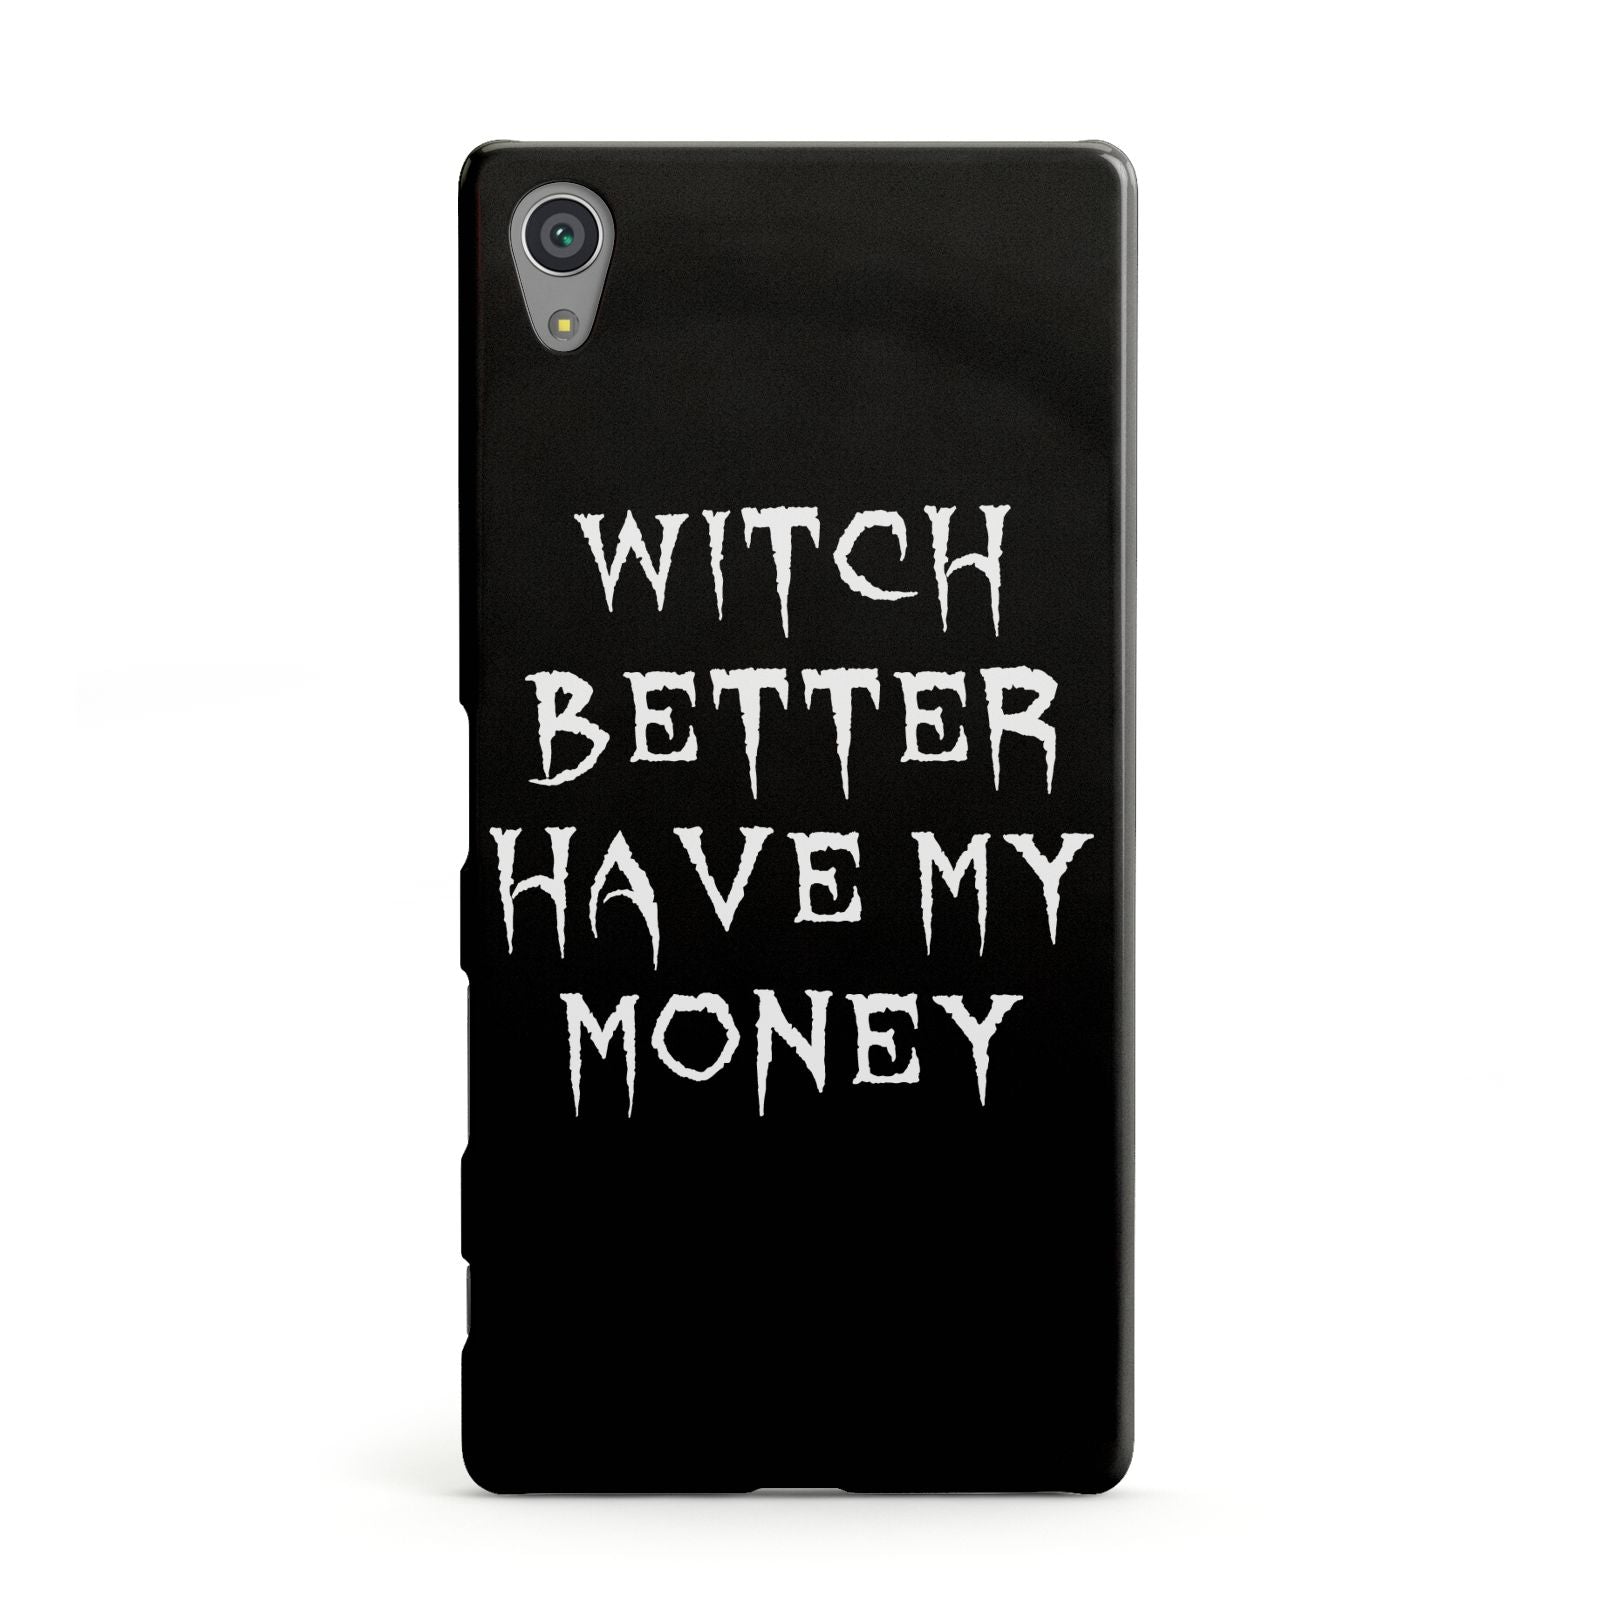 Witch Better Have My Money Sony Xperia Case